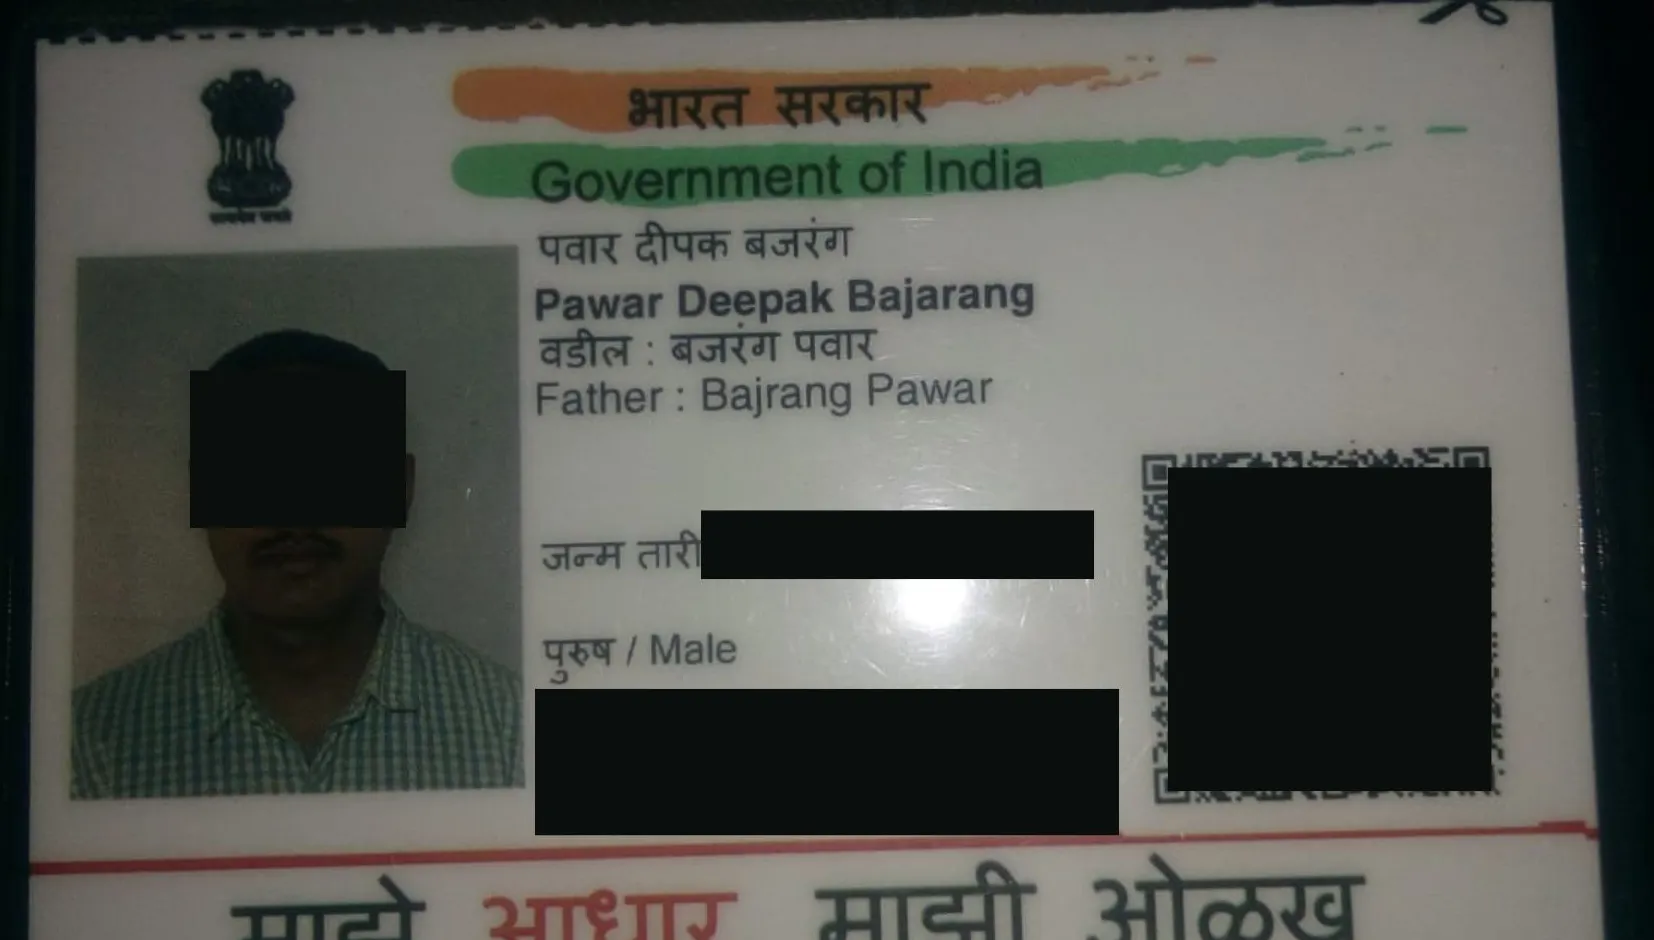 One of the ID cards shared by the scammer.